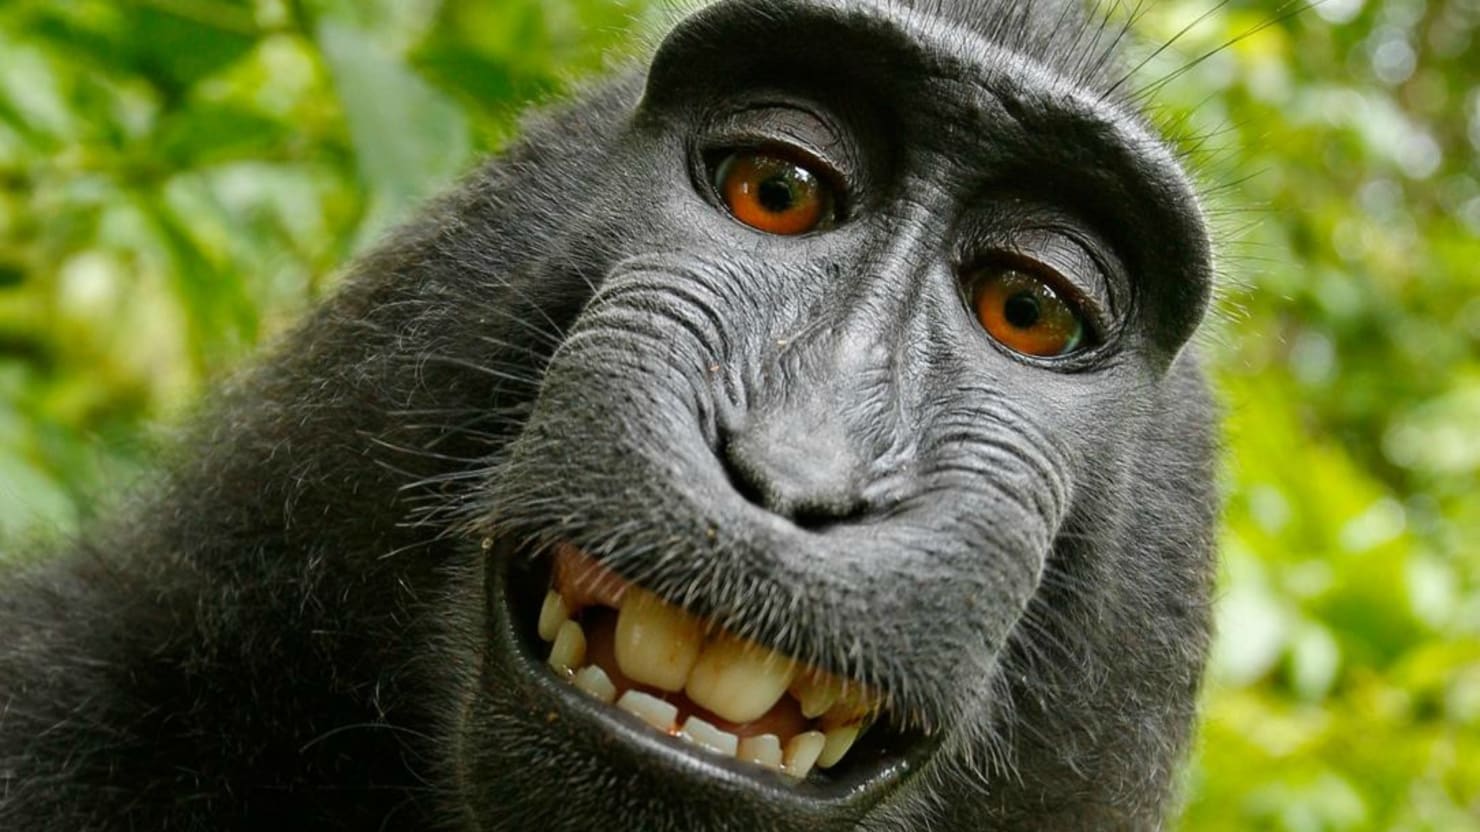 Monkey Selfie Can’t Be Copyrighted.